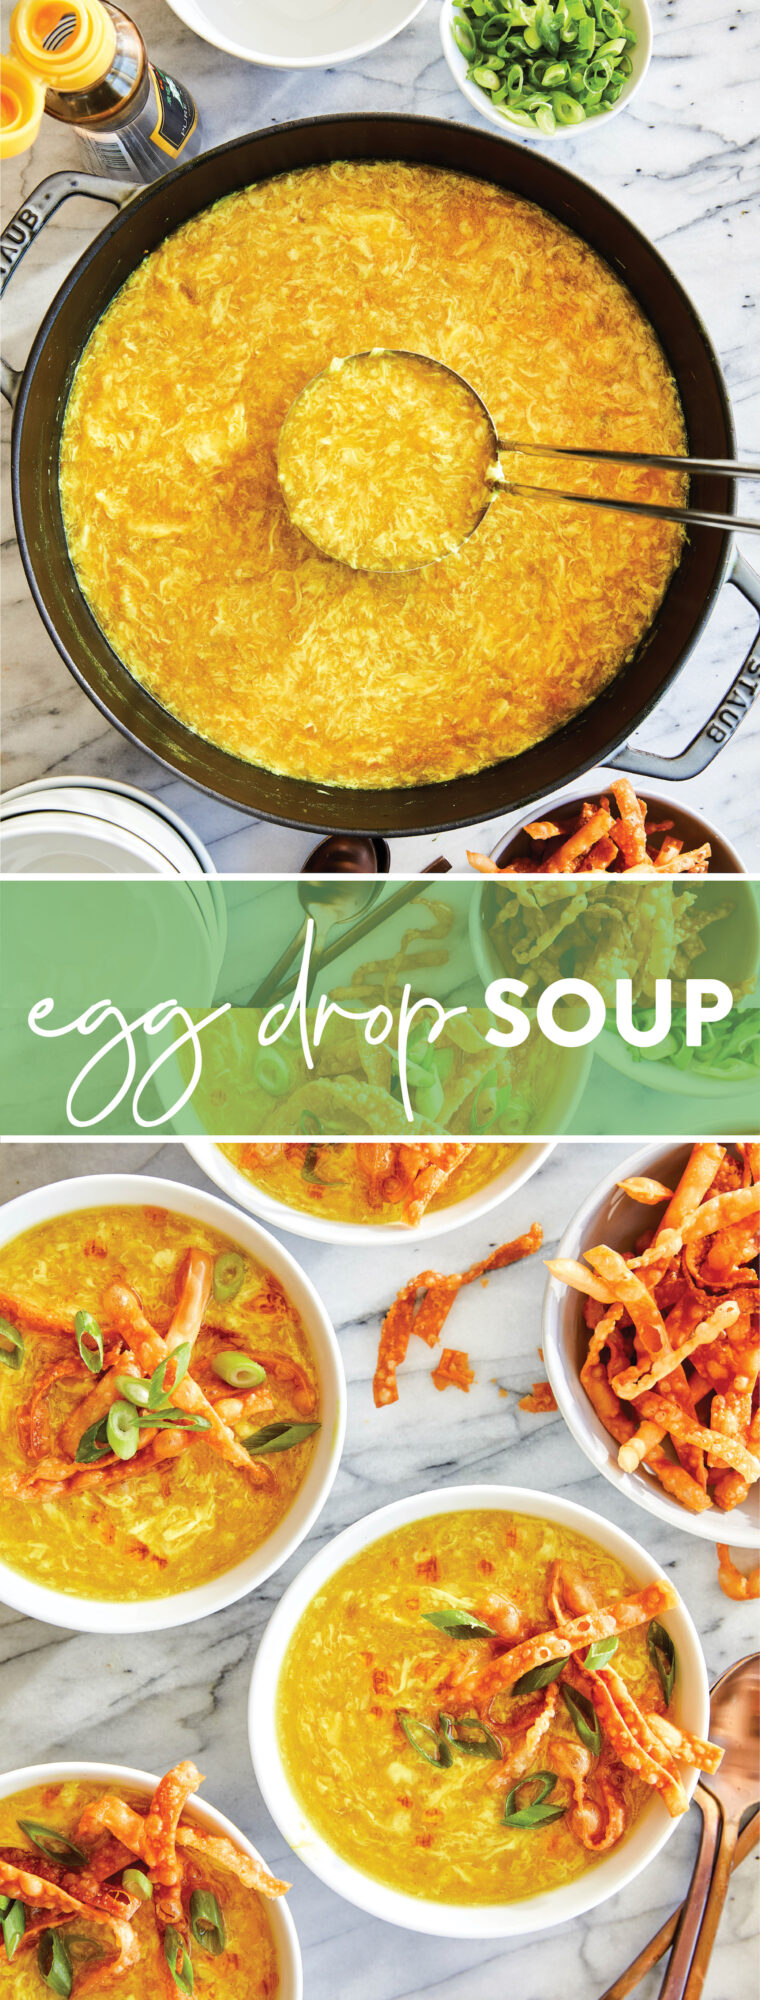 Egg Drop Soup - So much better than restaurant-quality! Made so easily right at home with a super short ingredient list. So good, so so cozy!